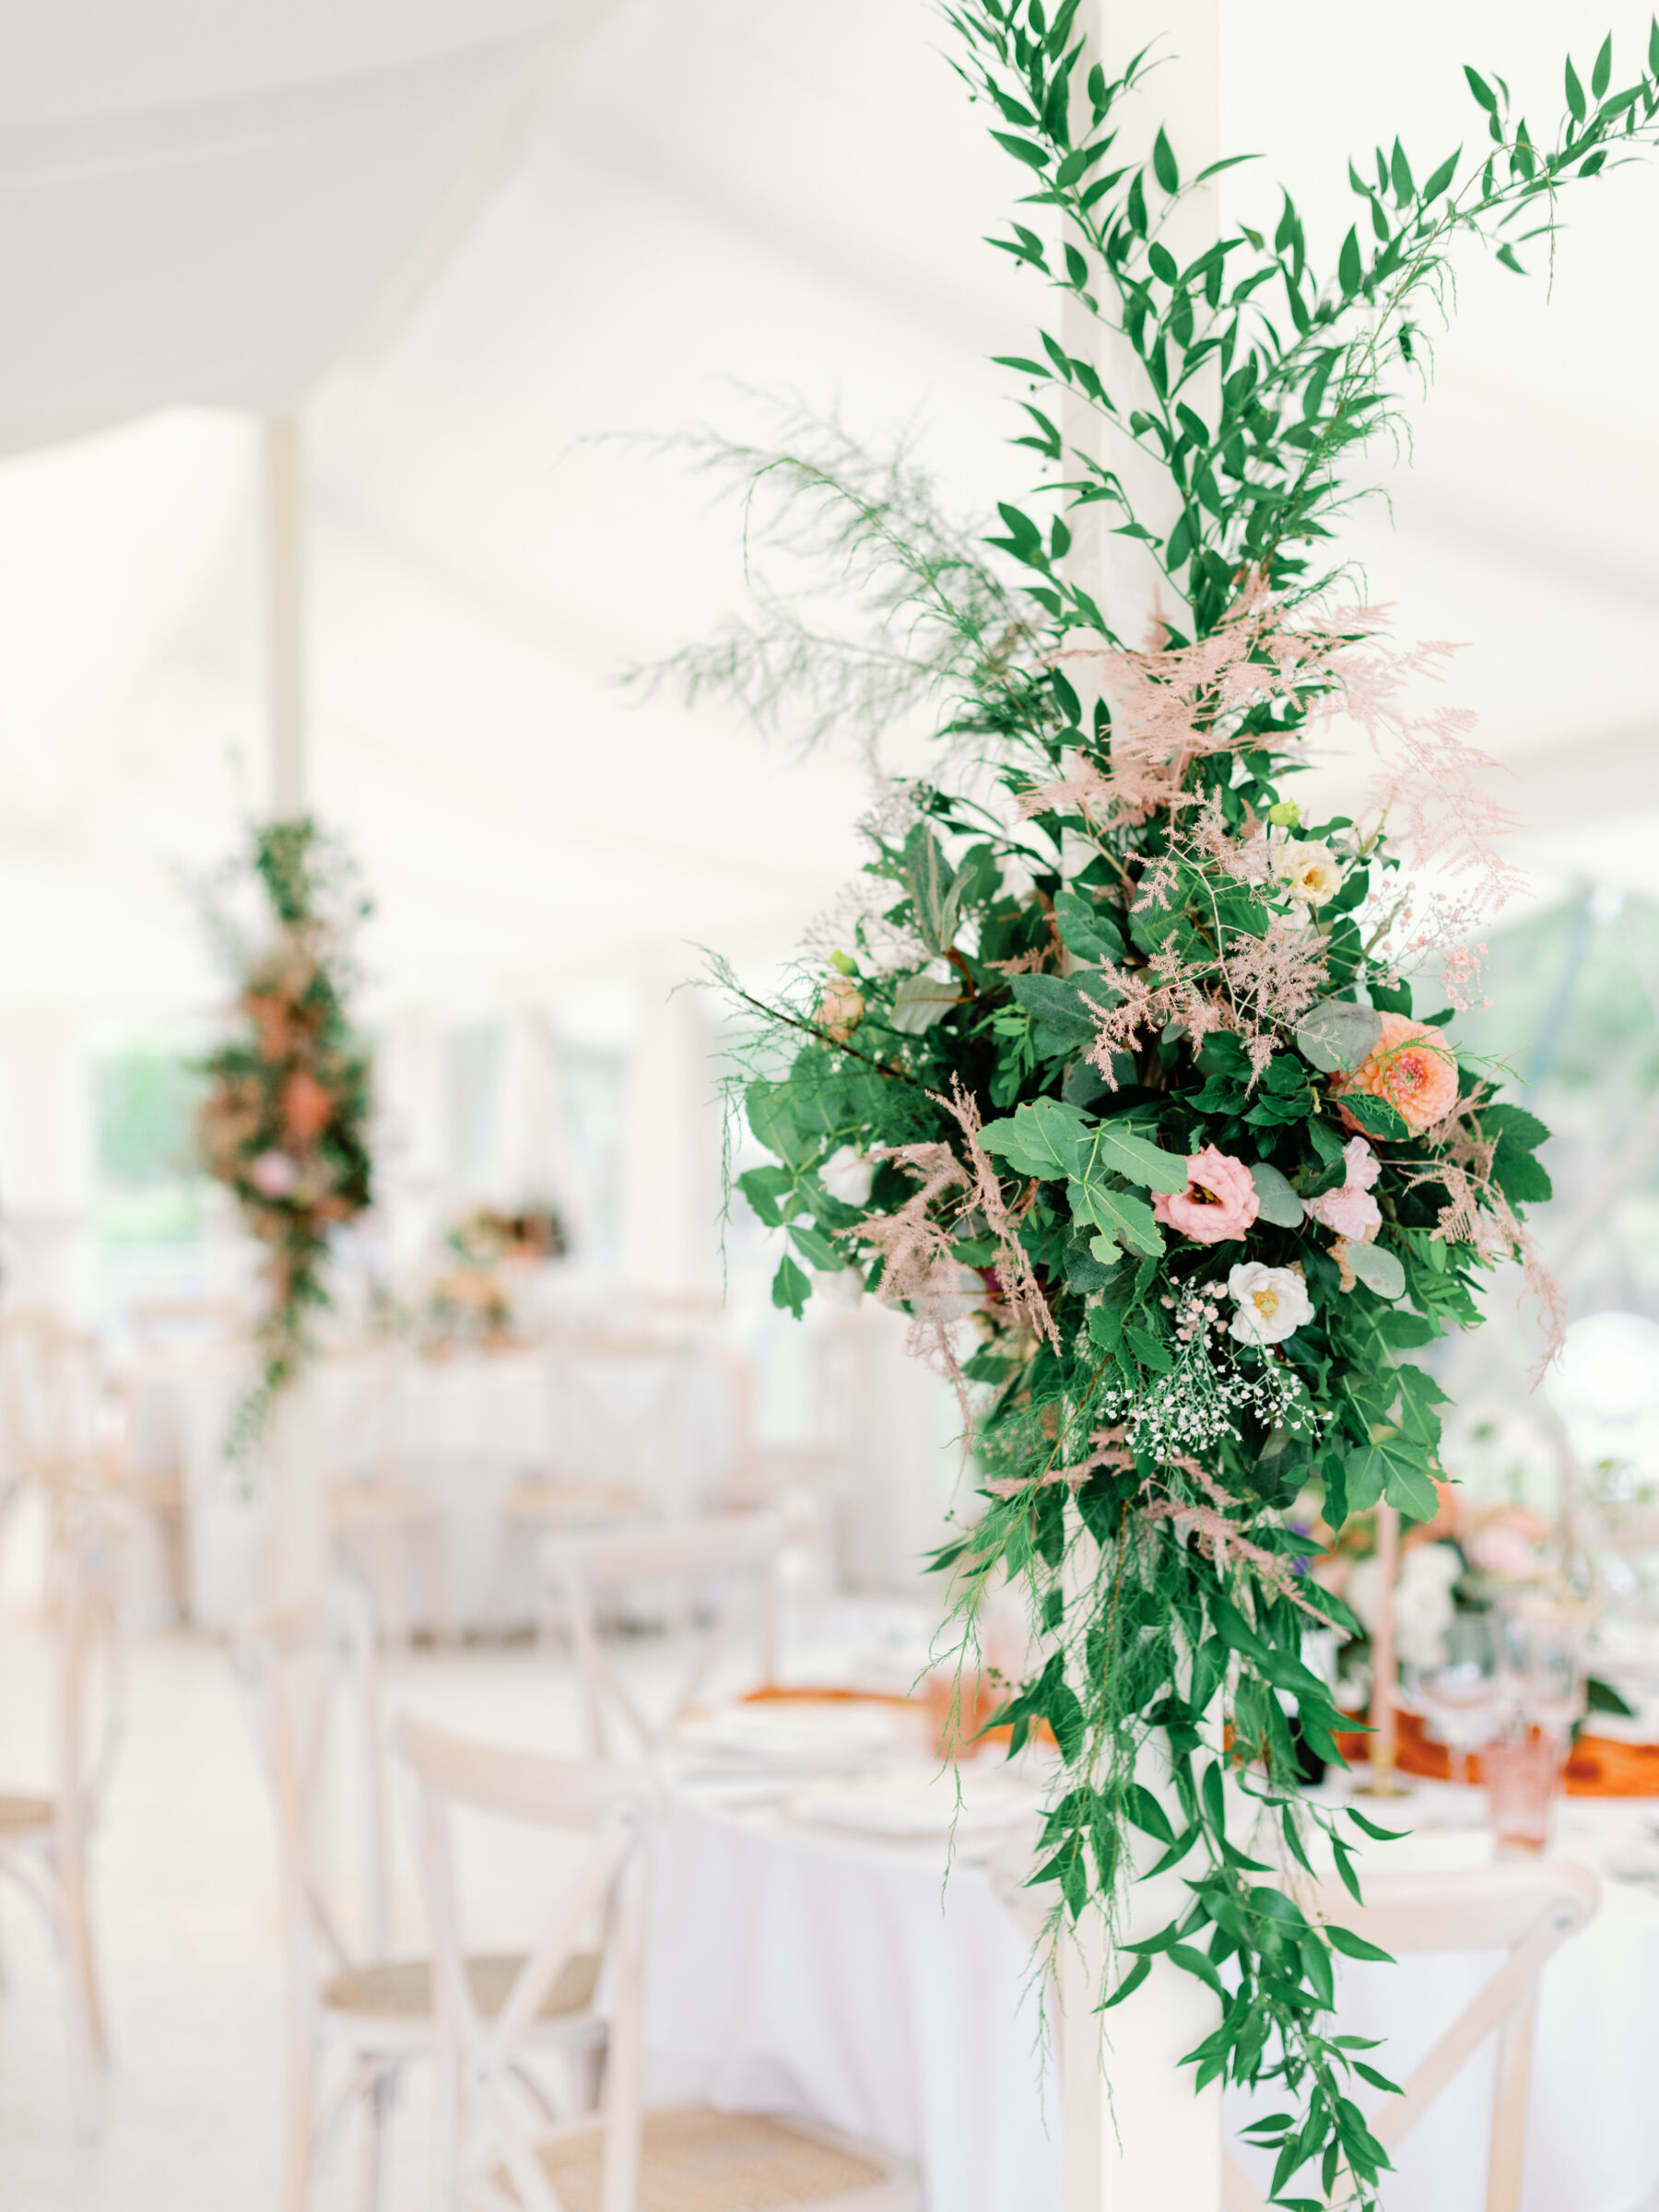 Wedding flowers in a light and airy space